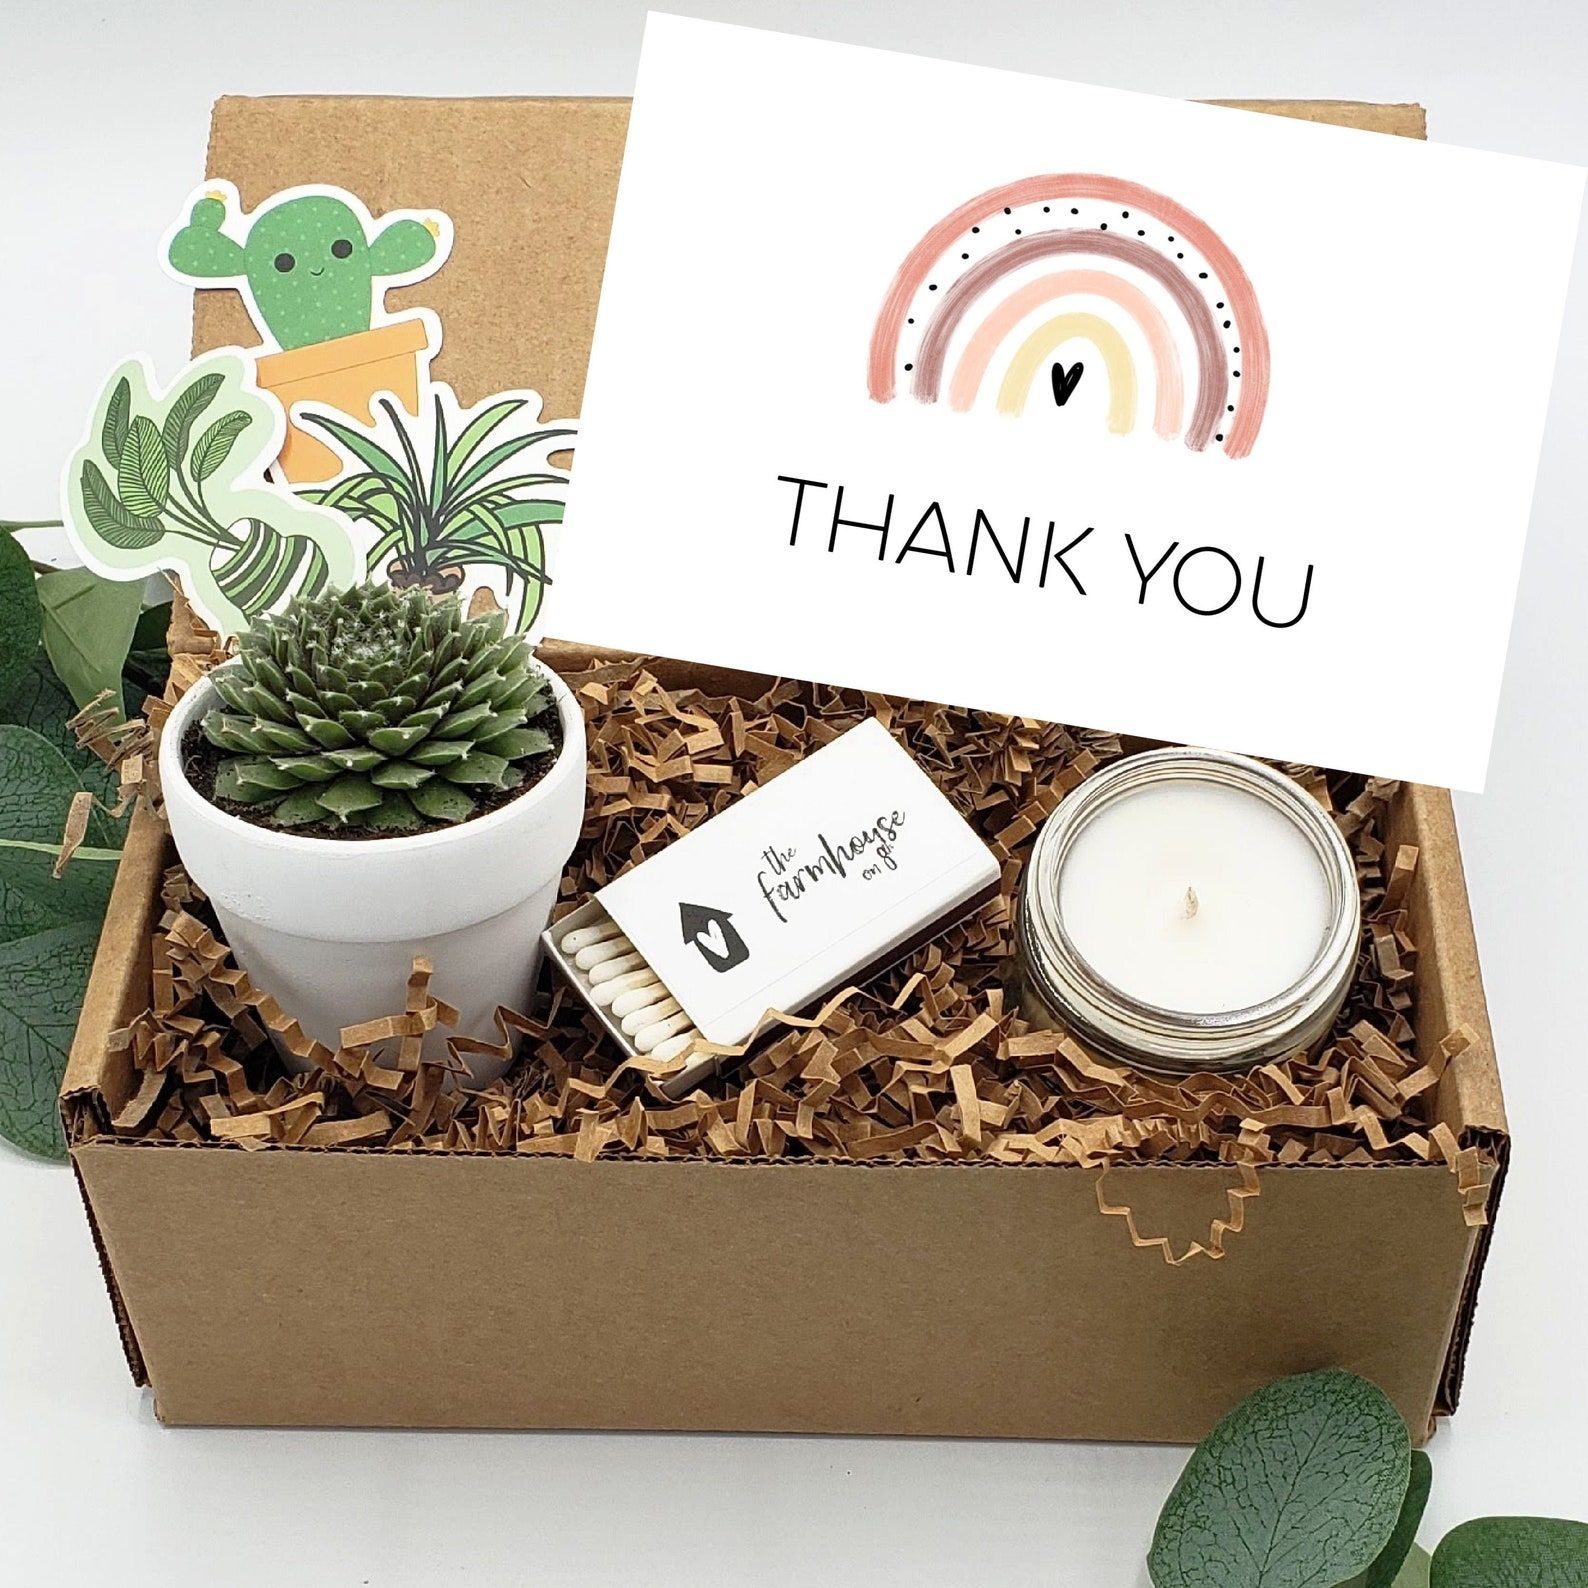 Aggregate 73+ inexpensive thank you gift ideas